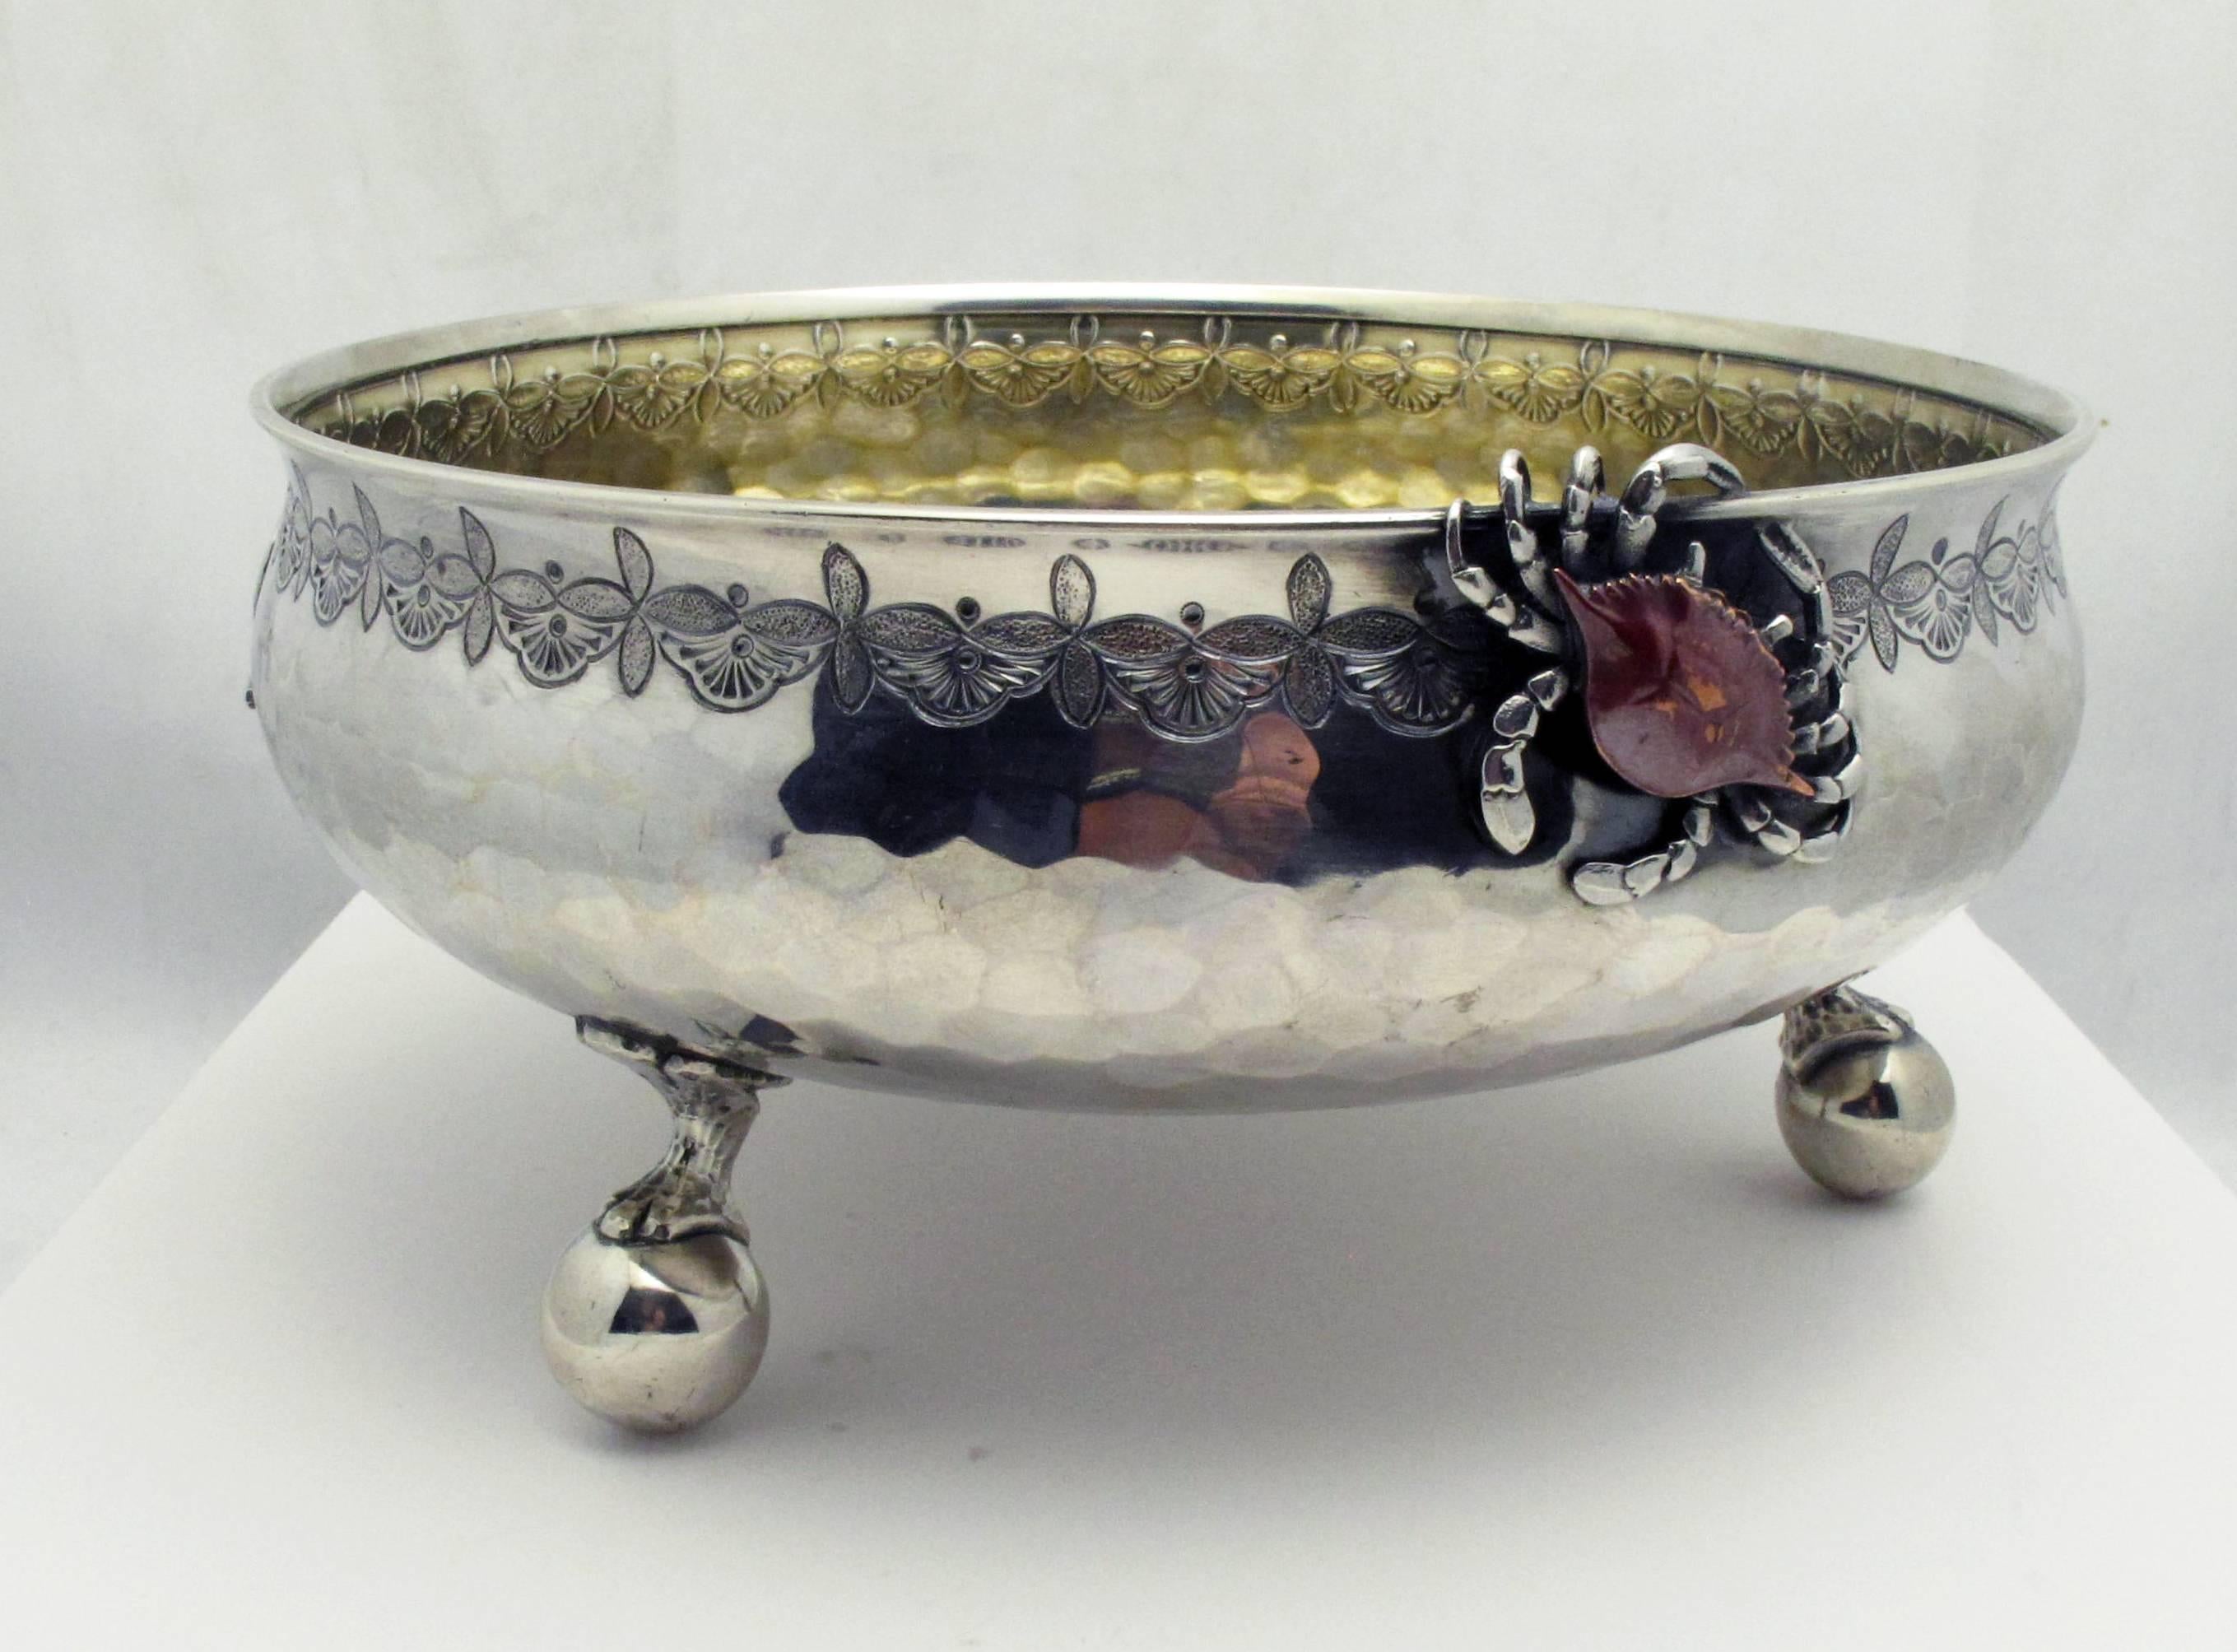 A beautiful sterling silver Japanese inspired footed bowl by Whiting. The bowl is set on three ball feet and adorned with naturalistic elements with copper accents. The entire bowl is hand-hammered with a slightly gilded interior. The base is